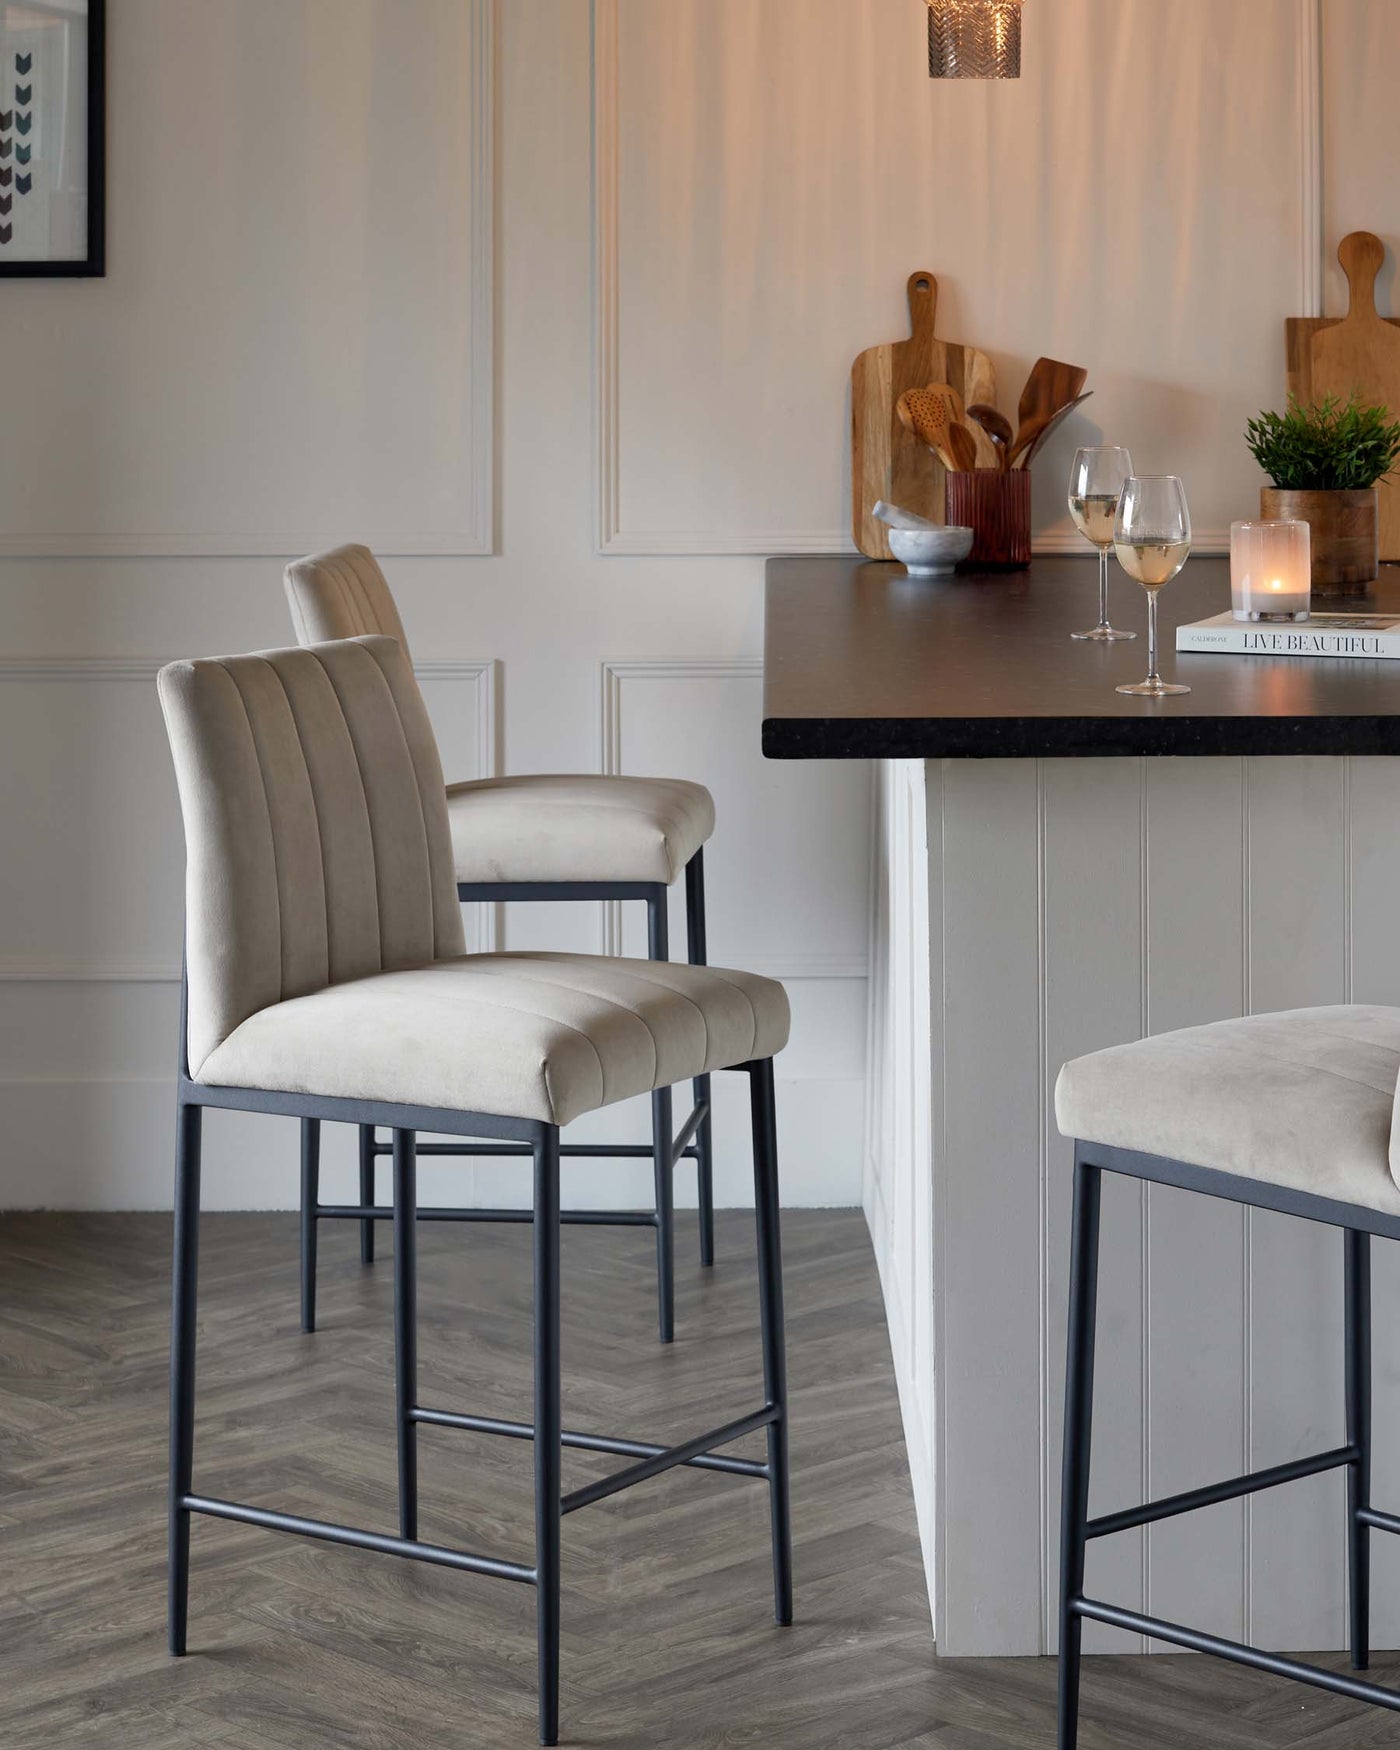 Elegant modern bar stools with beige velvet upholstery and channel tufting on the backrest, seated on a sleek black metal frame with a footrest, positioned adjacent to a kitchen island with a dark countertop.